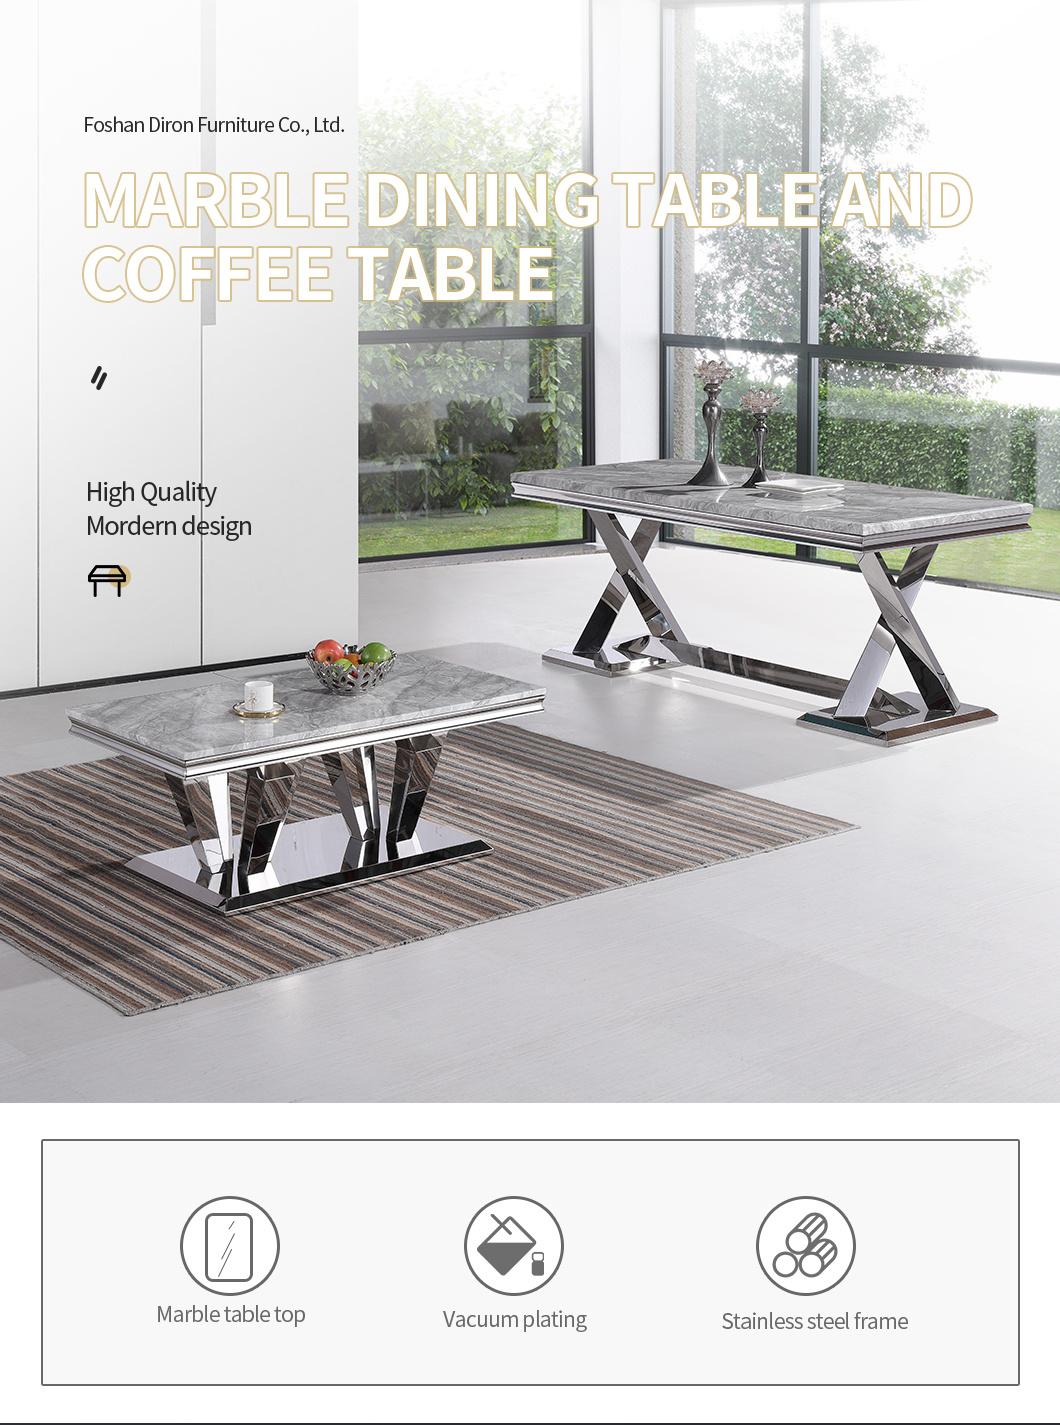 China High Quality Marble Table Top Dining Table Set Dining Room Stainless Steel Marble Table Furniture 6 Chair Dining Table Set